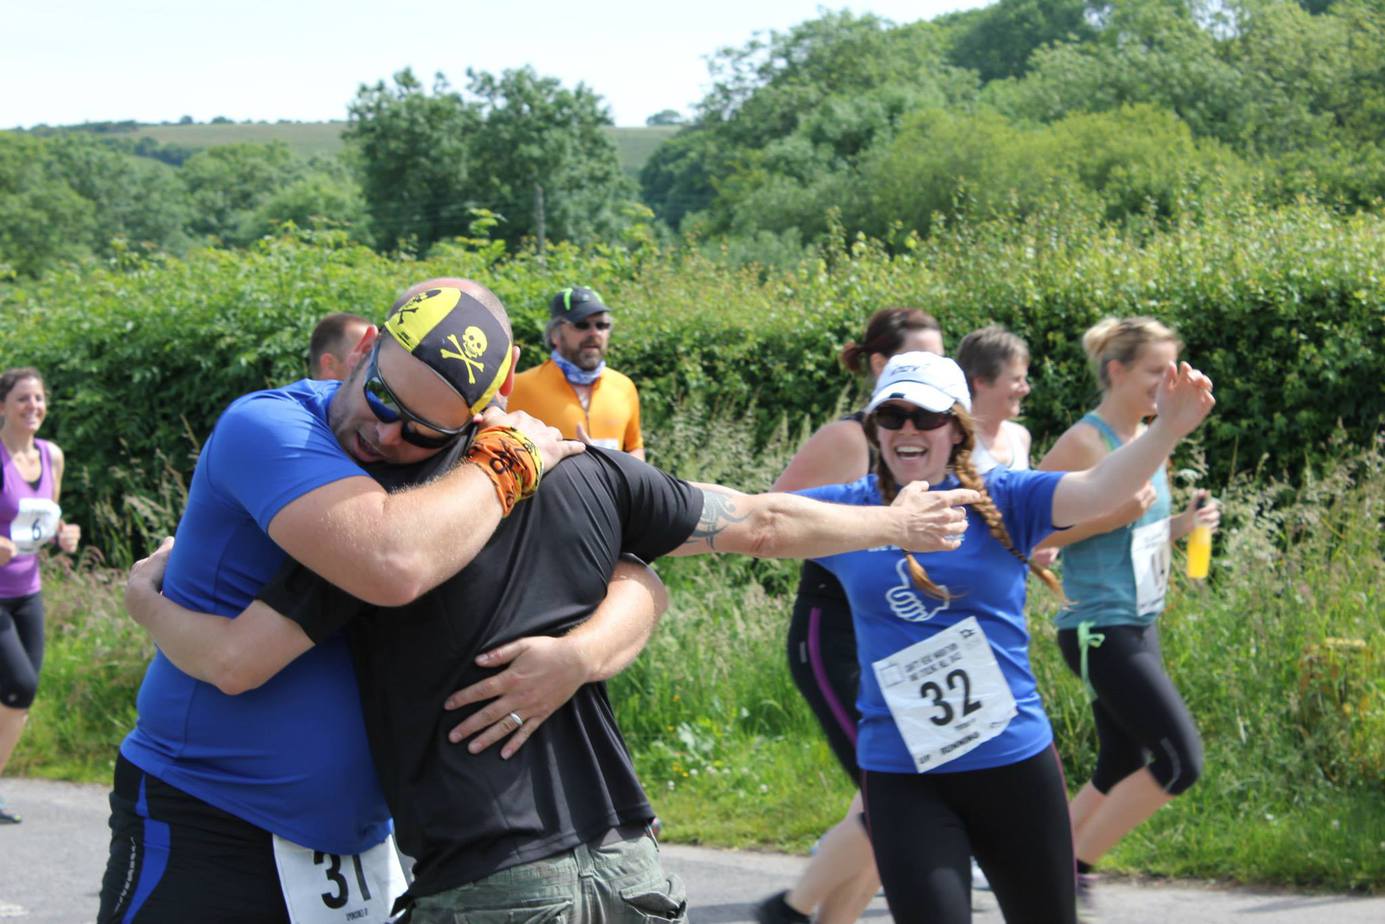 Runners hugging on the running event route